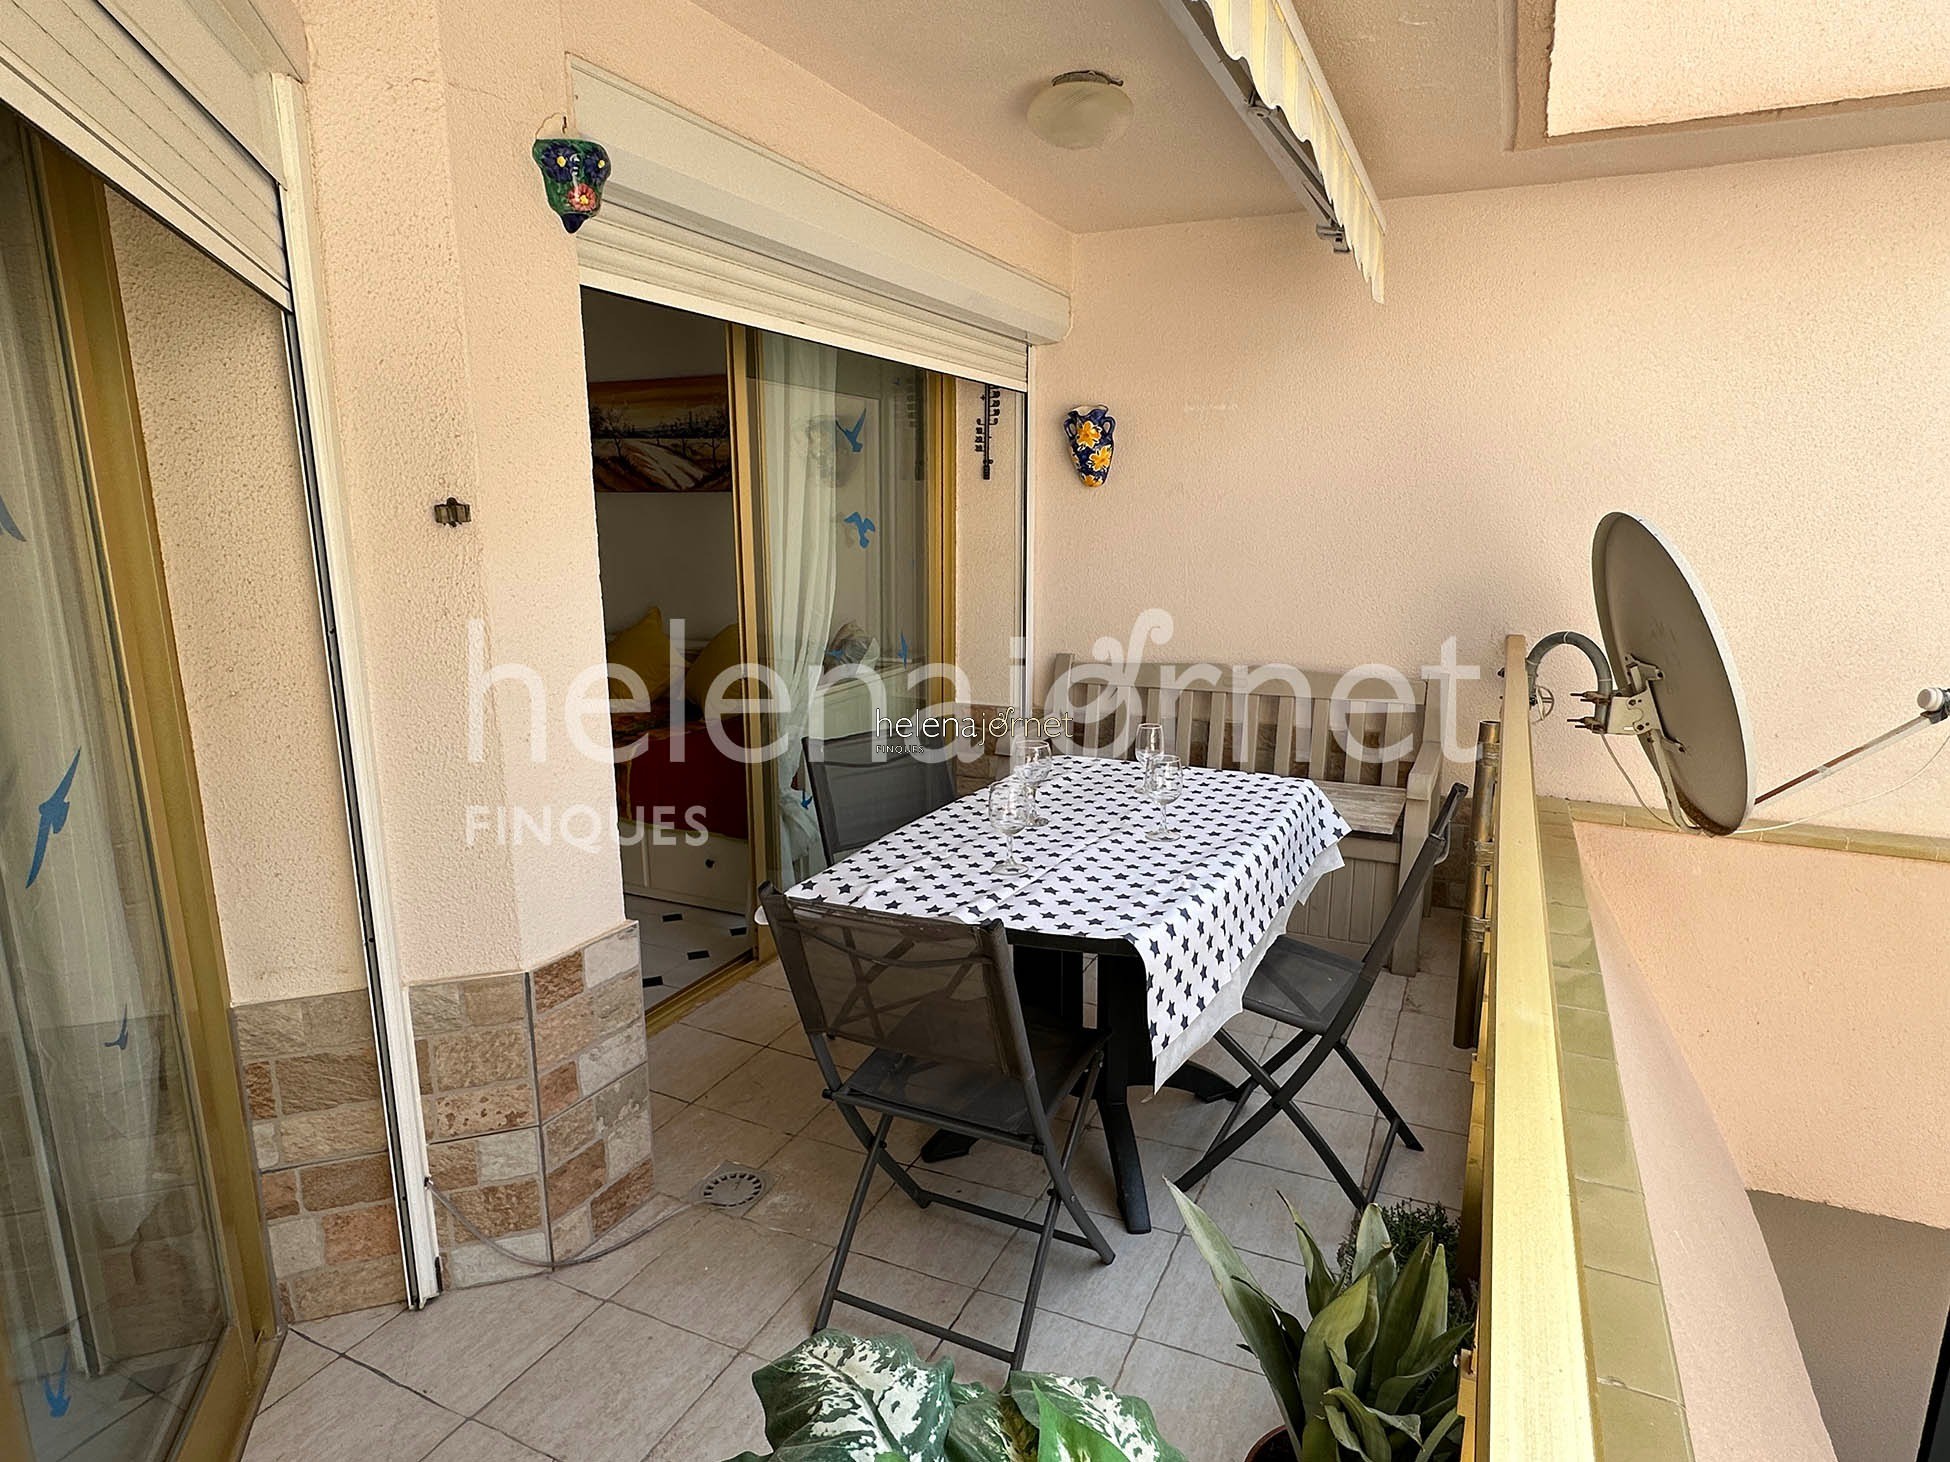 One bedroom flat with terrace, air conditioning, swimming pool and parking - 70142 - Piramides II